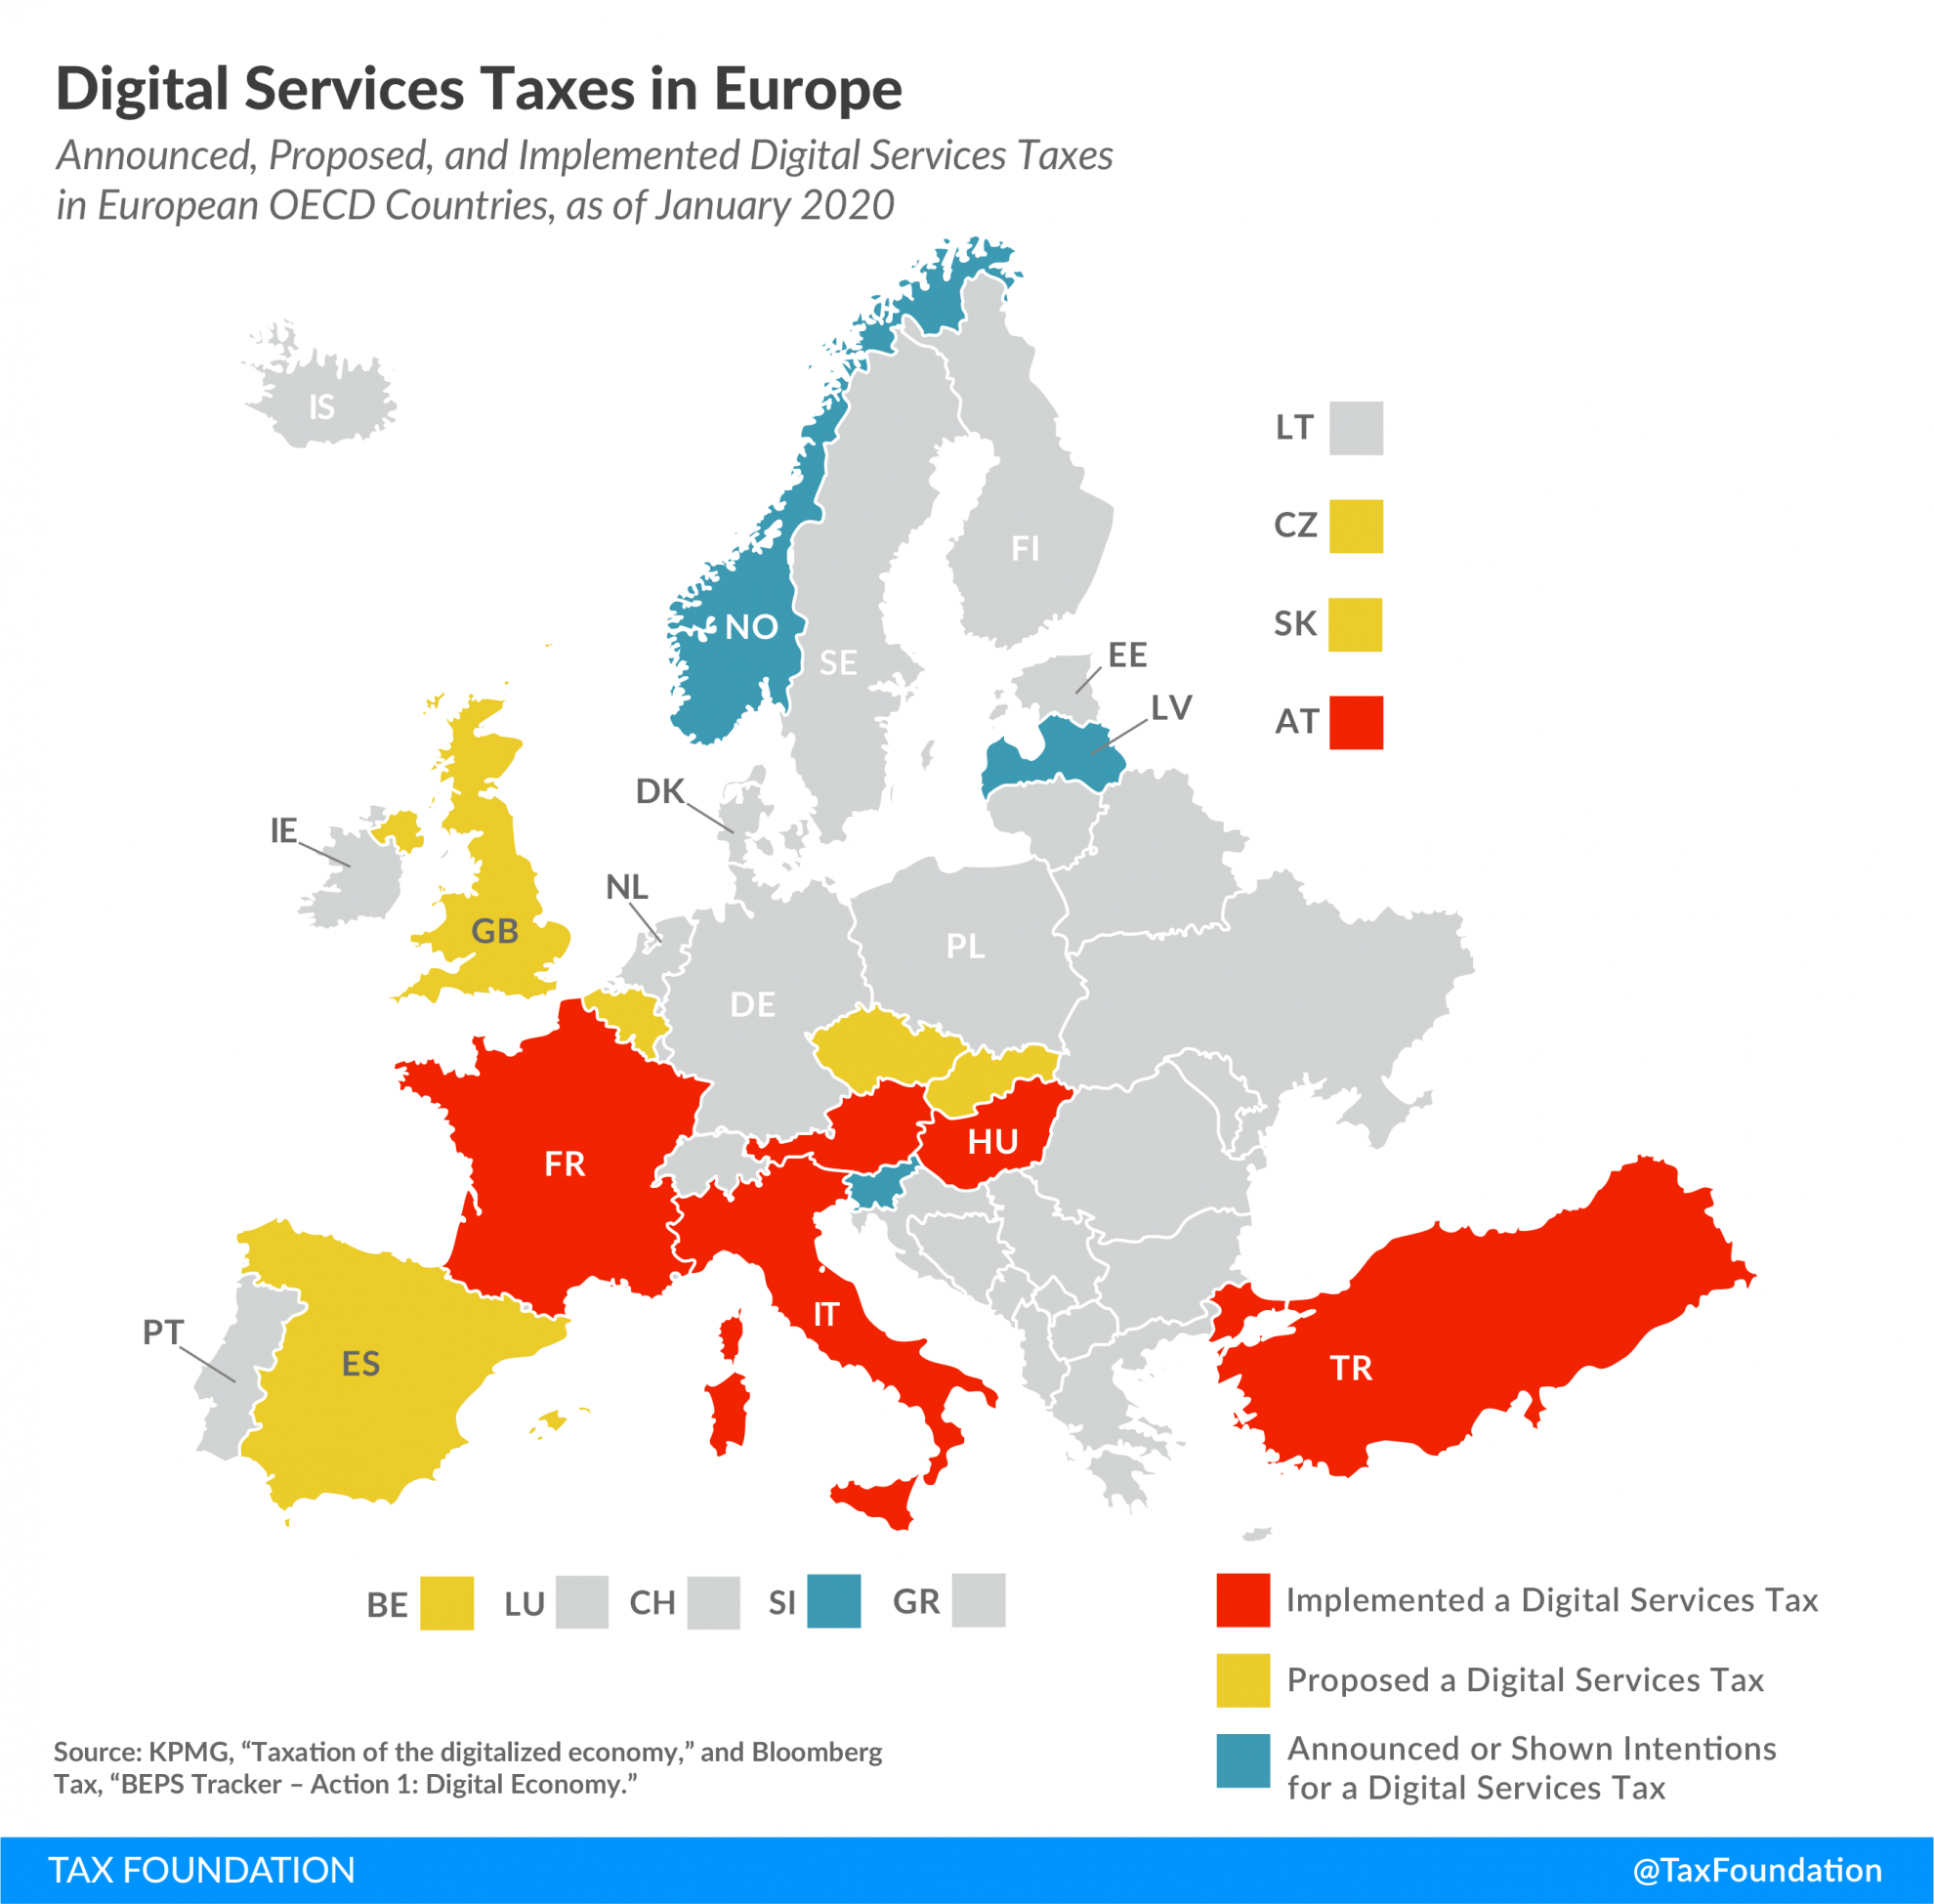 Digital Services Taxes in Europe. Digital taxes in Europe that have been implemented, announced, and proposed. Learn more about digital taxation in Europe, digital economy tax, digital tax europe